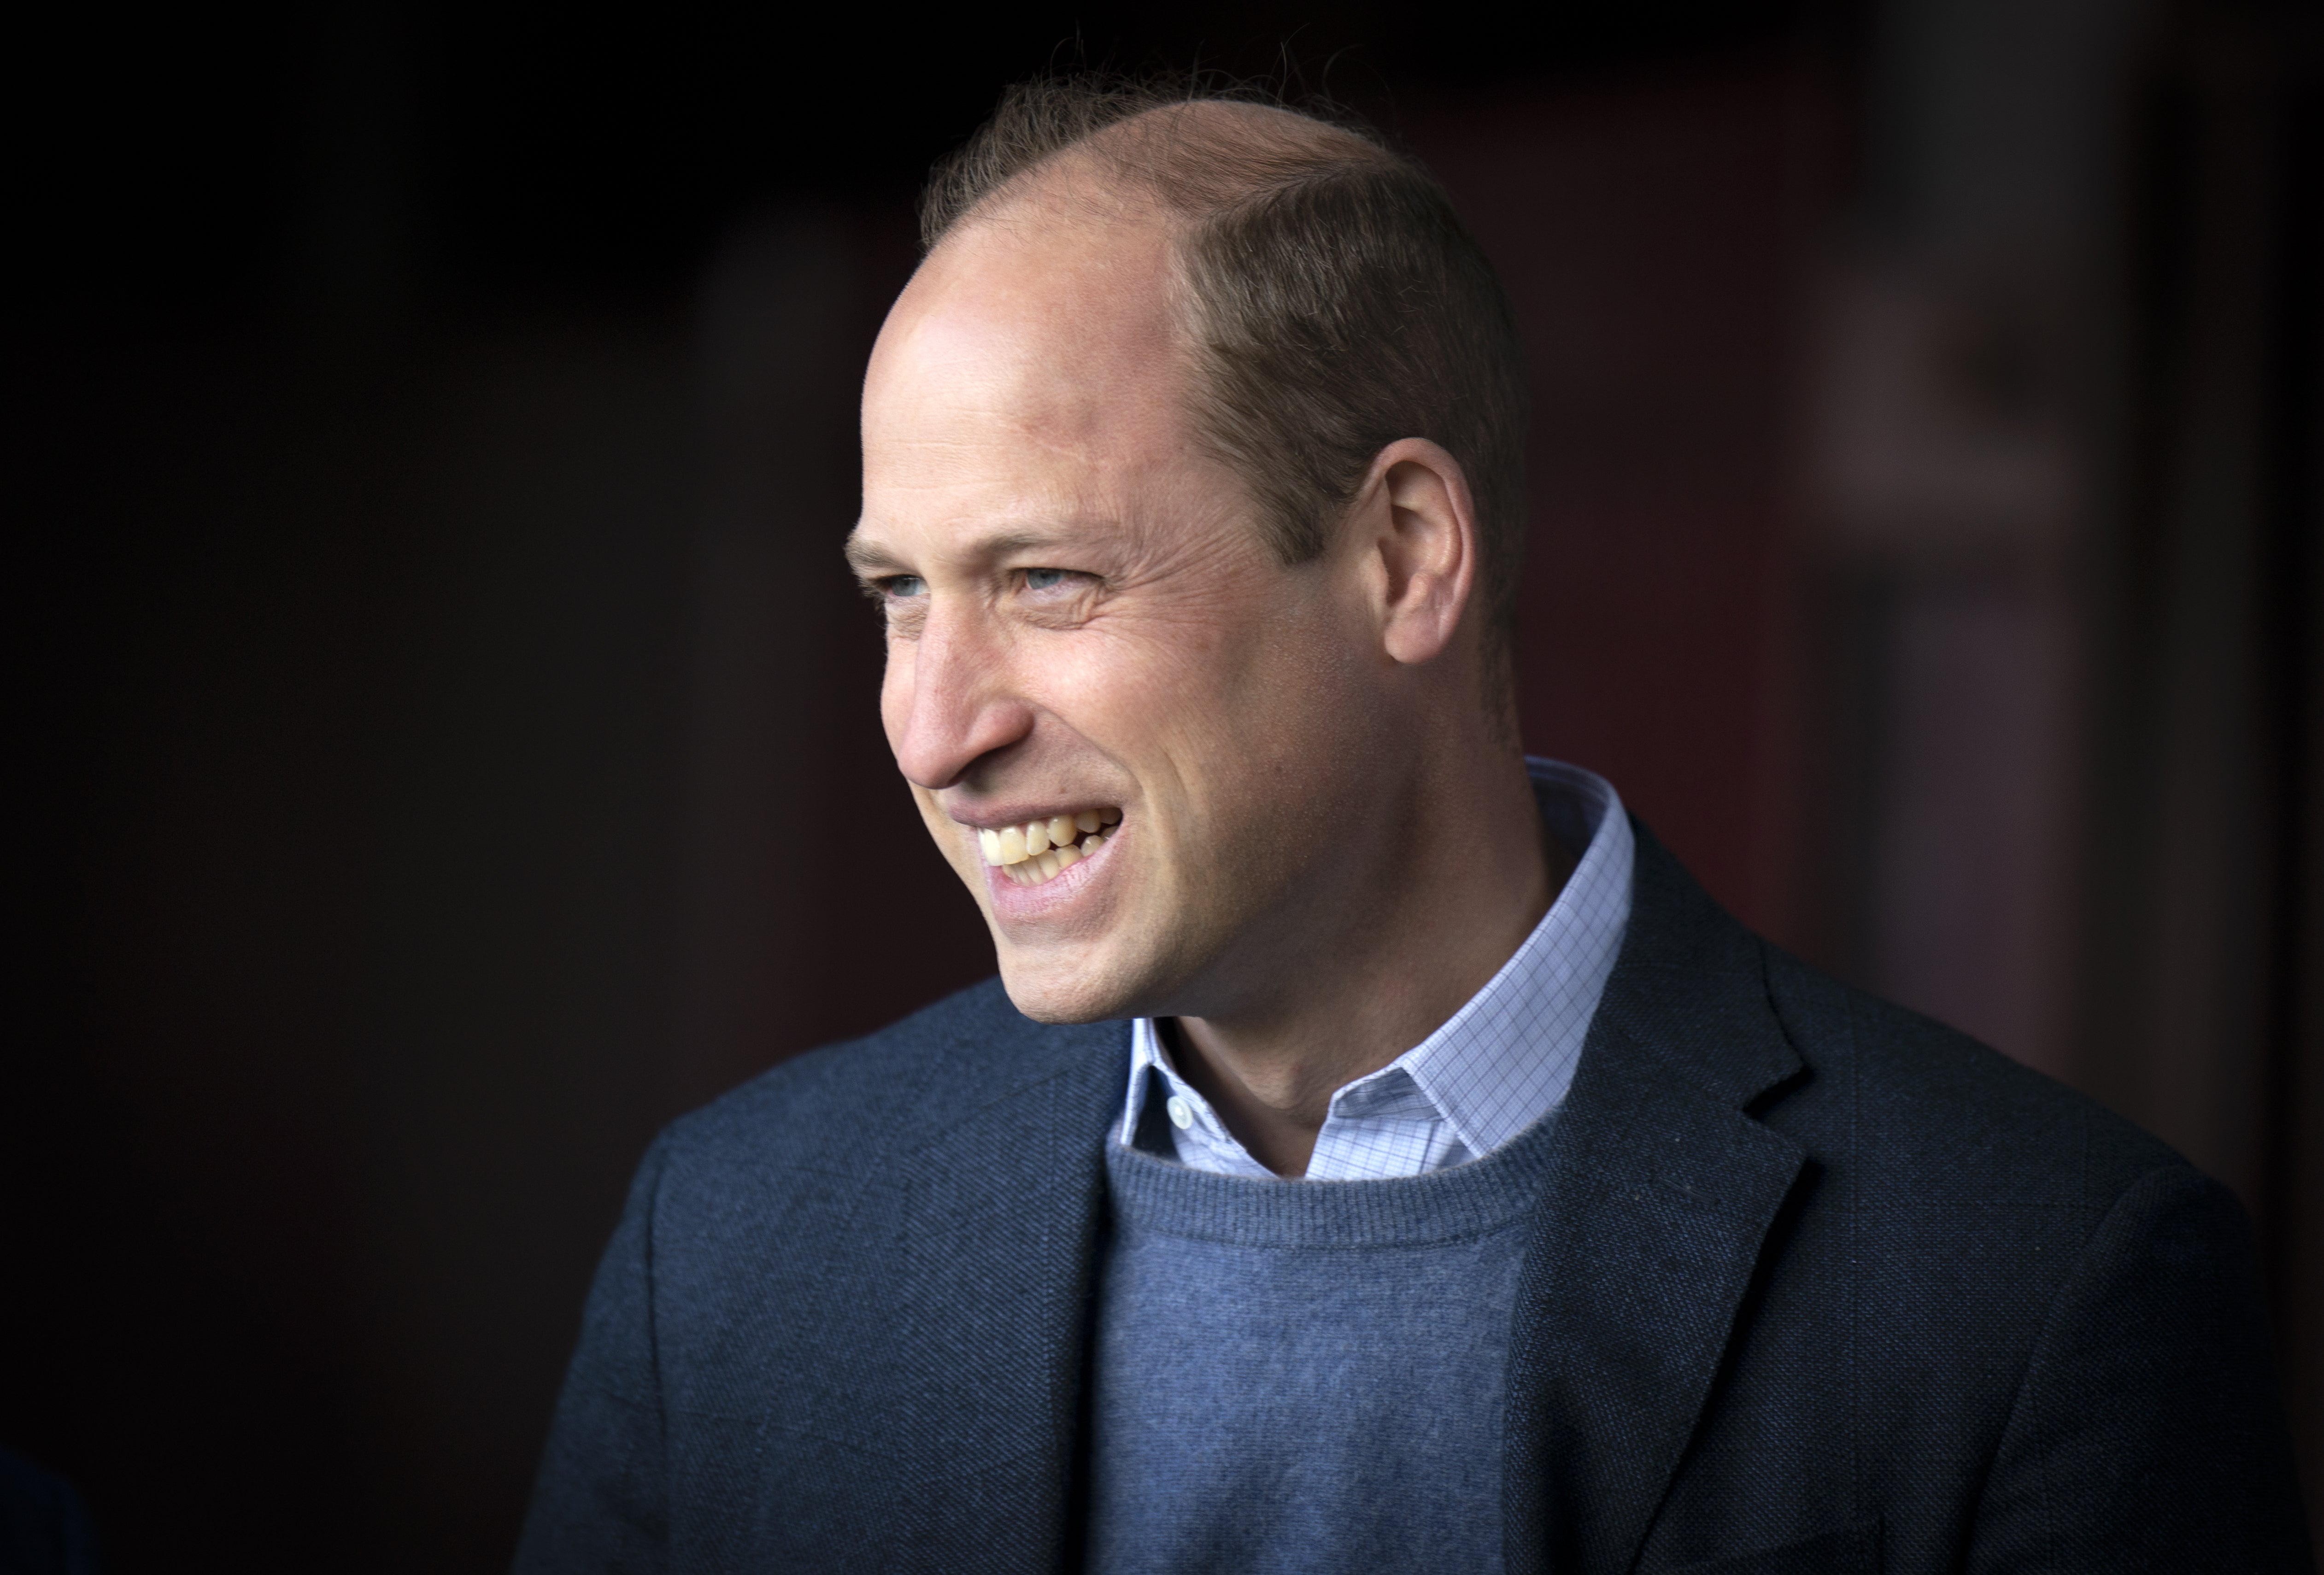 The Duke of Cambridge at Heart of Midlothian Football Club, Edinburgh, during a visit to see the ‘The Changing Room’ programme launched by SAMH (Scottish Association for Mental Health) in 2018 and is now delivered in football clubs across Scotland. Picture date: Thursday May 12, 2022 (Jane Barlow/PA)